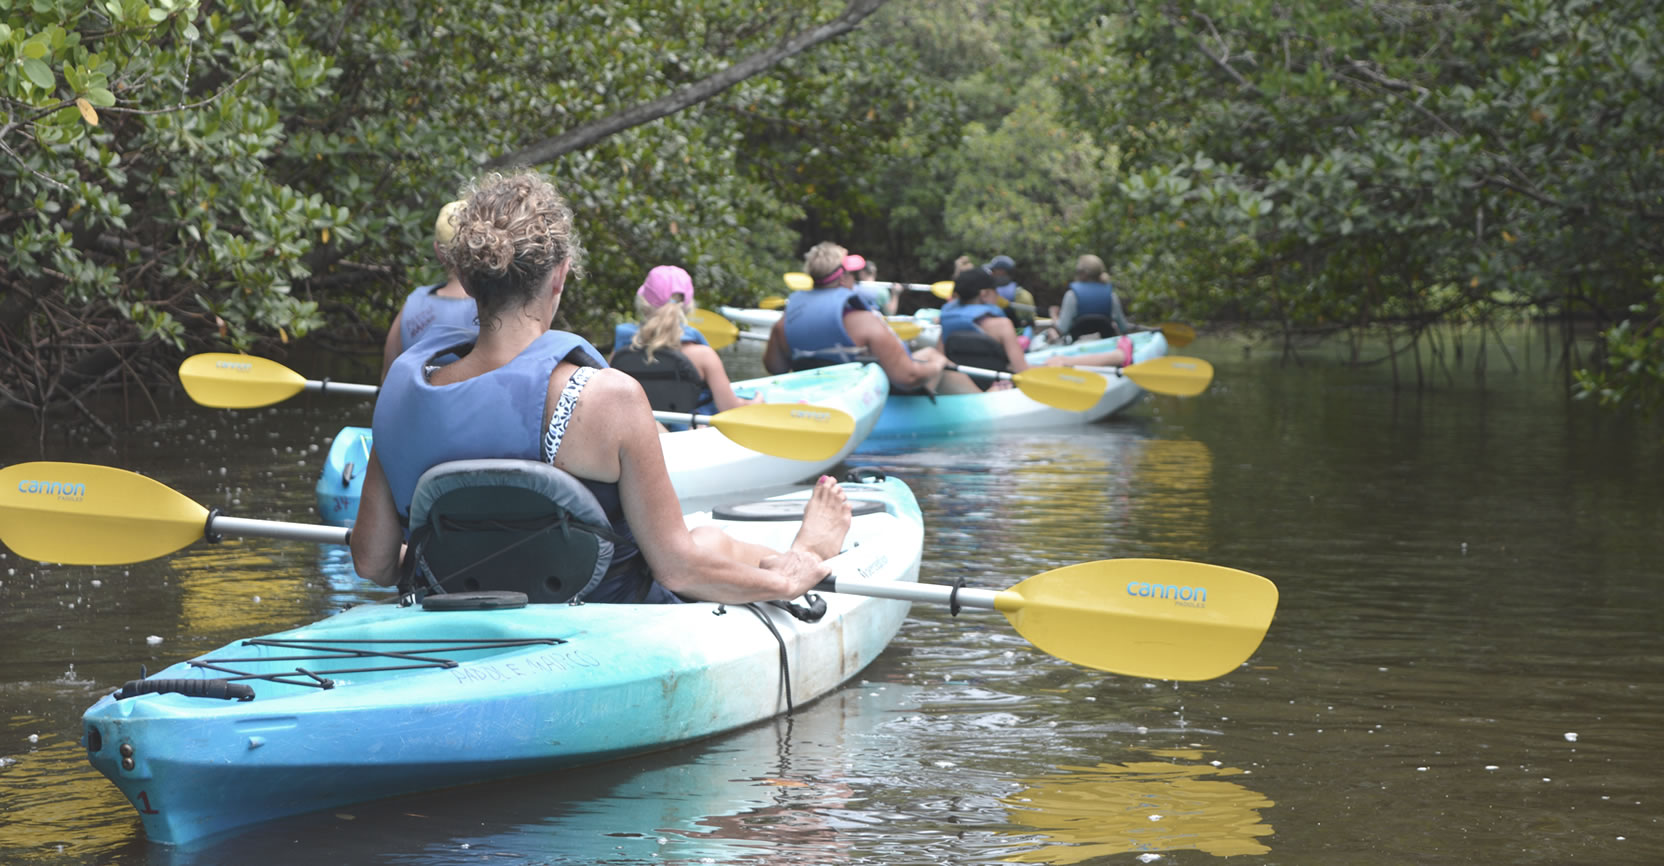 About our kayak tours